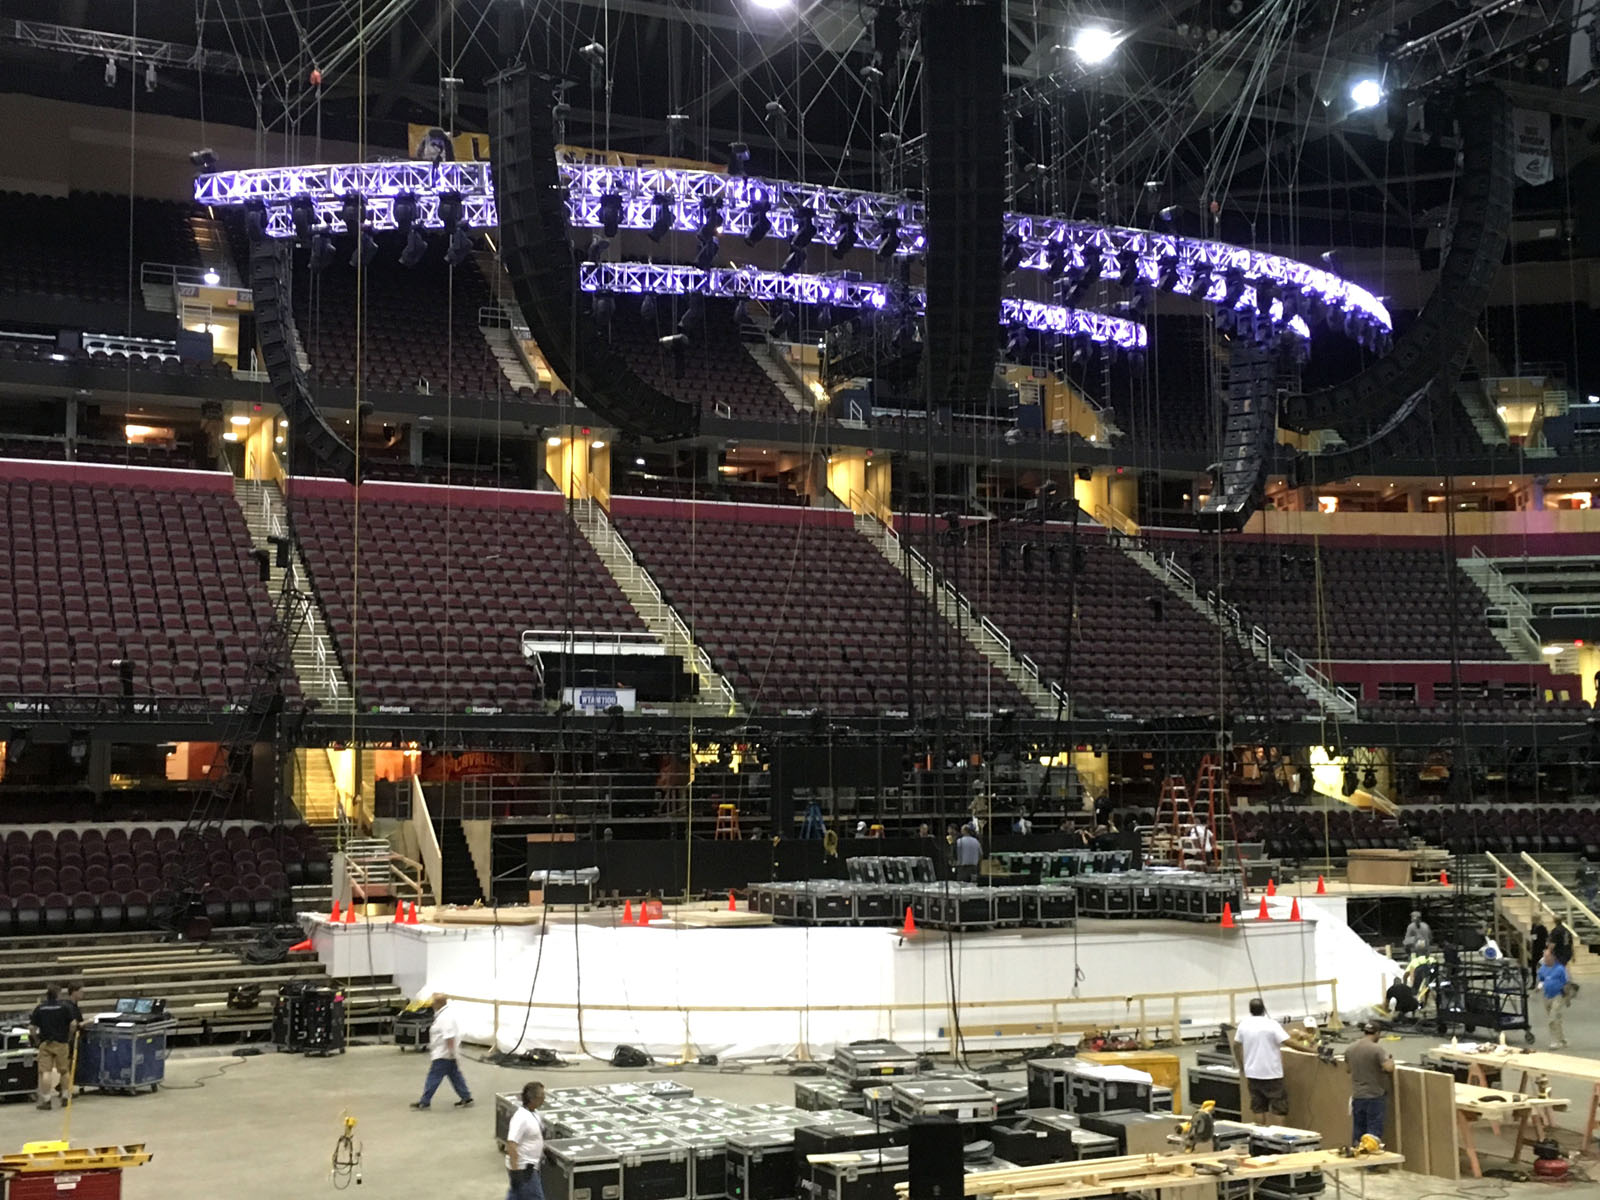 FILE - In this June 28, 2016 file photo, work continues on the main stage for the Republican National Convention in Cleveland. (AP Photo/Mark Gillispie)